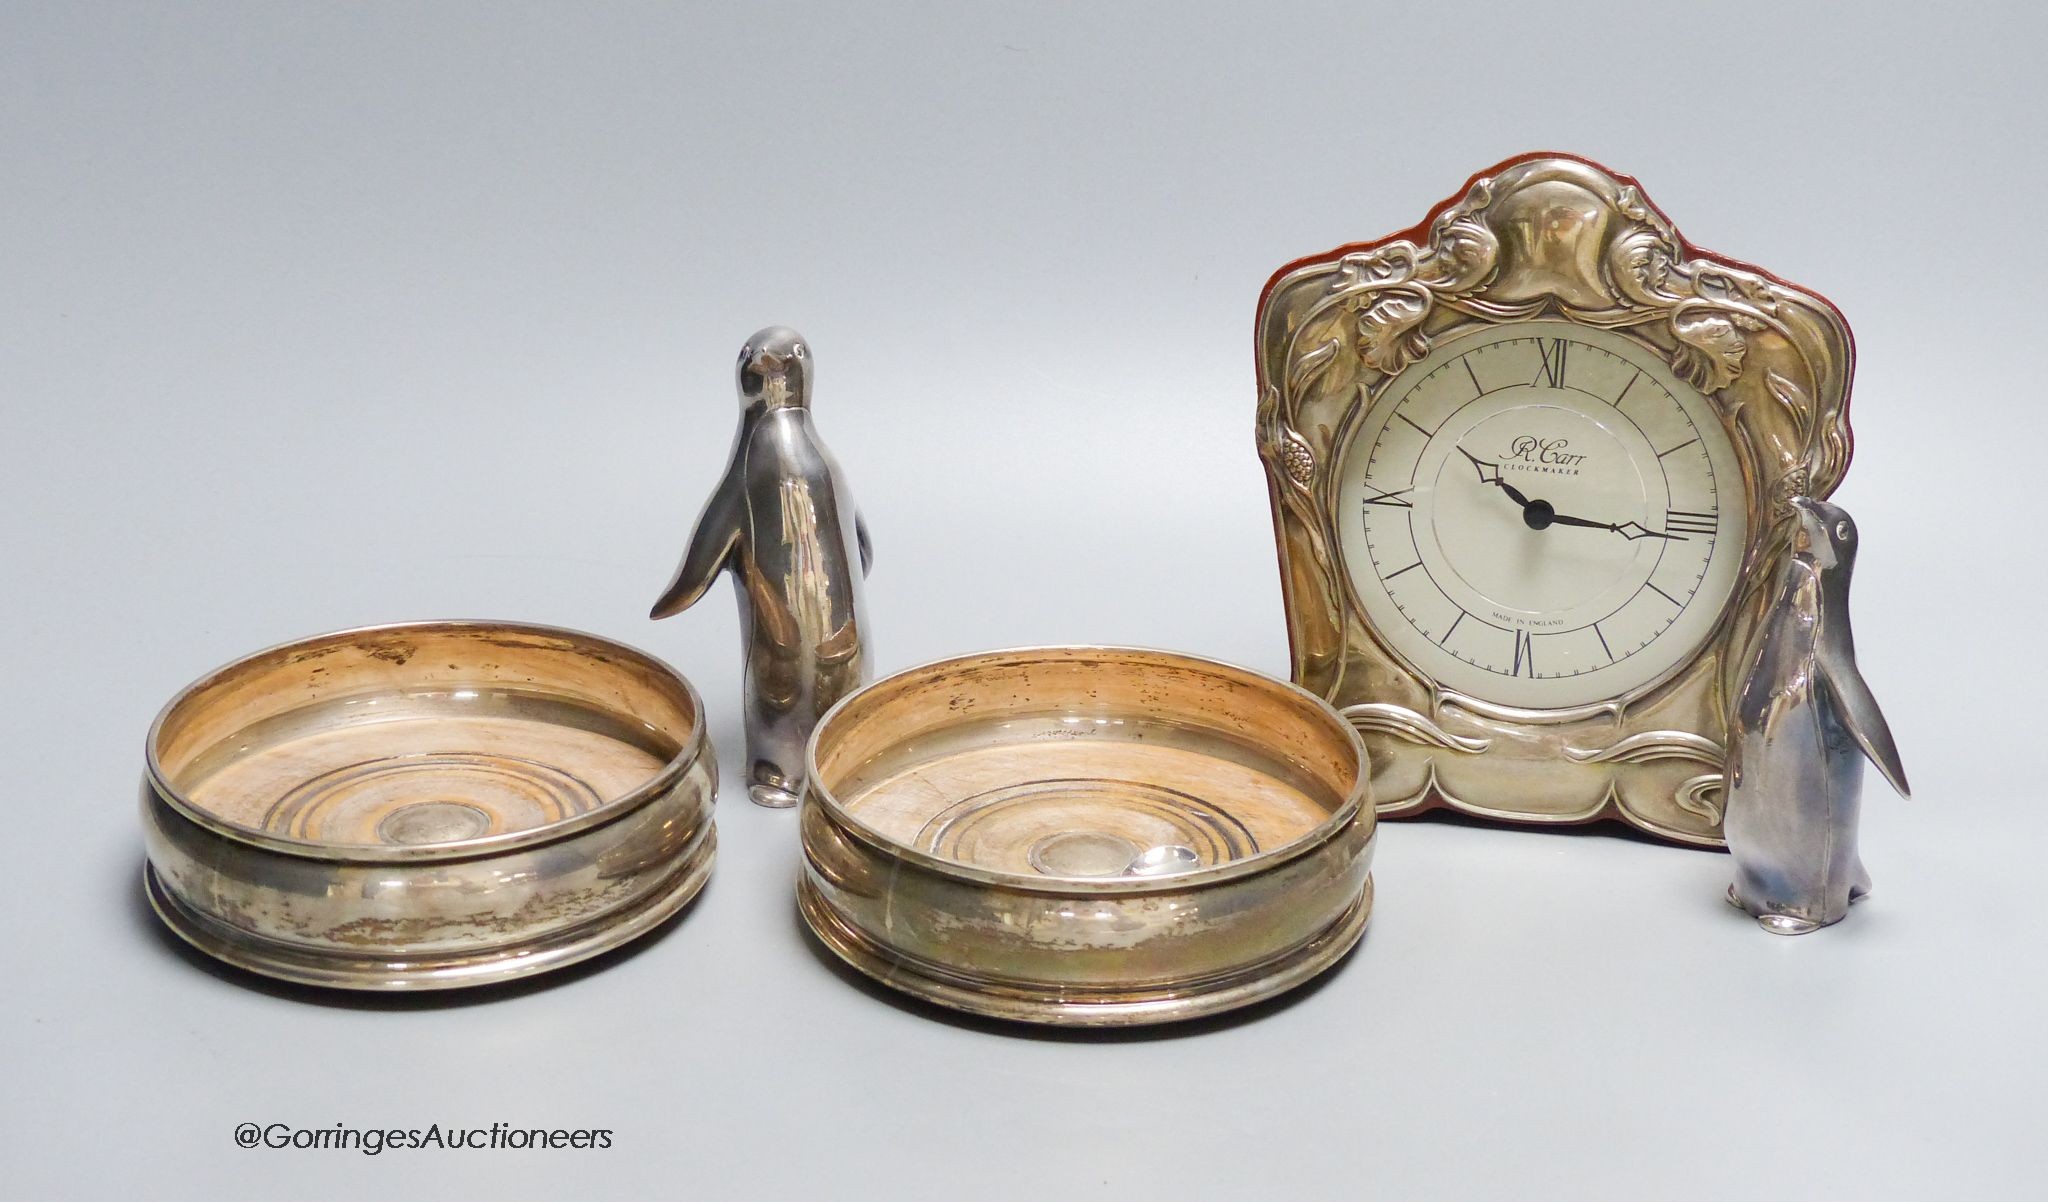 A small R. Carr silver mounted mantel clock, modern, a pair of silver coasters, JB Ld, London 1996, 12.5cm, two Italian penguin ornaments, stamped 990 and a similar 800 standard spoon